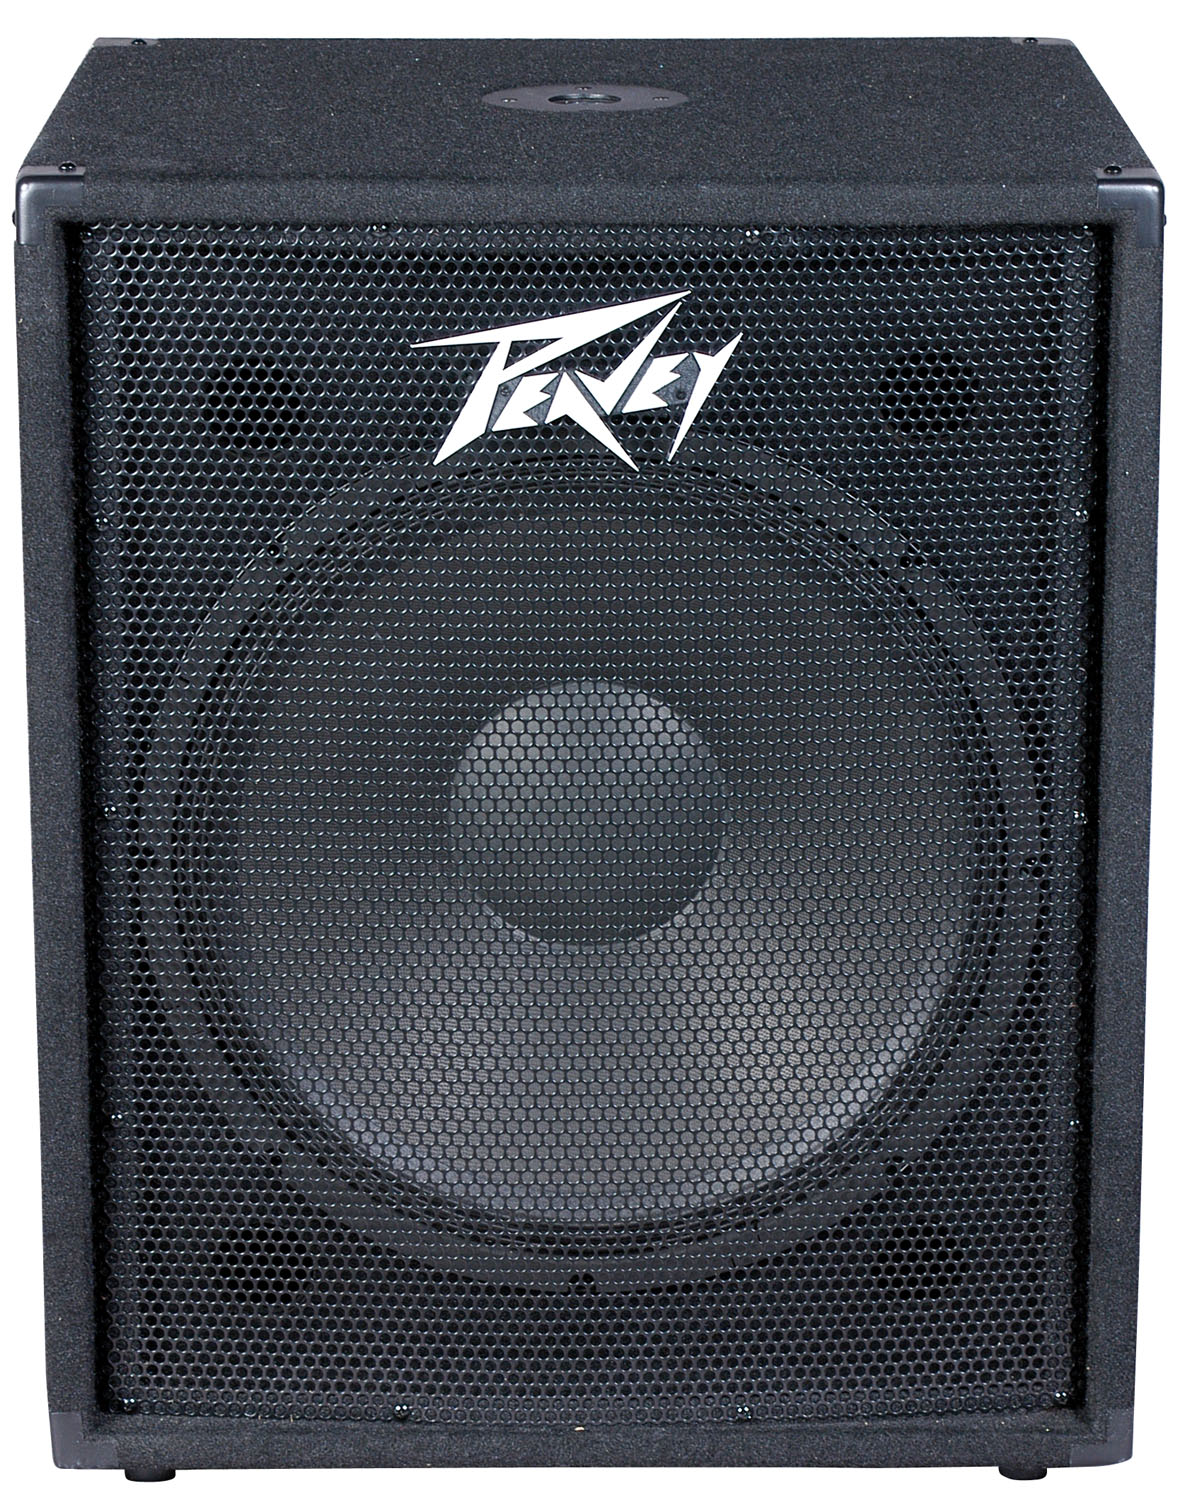 Peavey Peavey PV118D Active Subwoofer, 300 Watts, 1x18 Inch